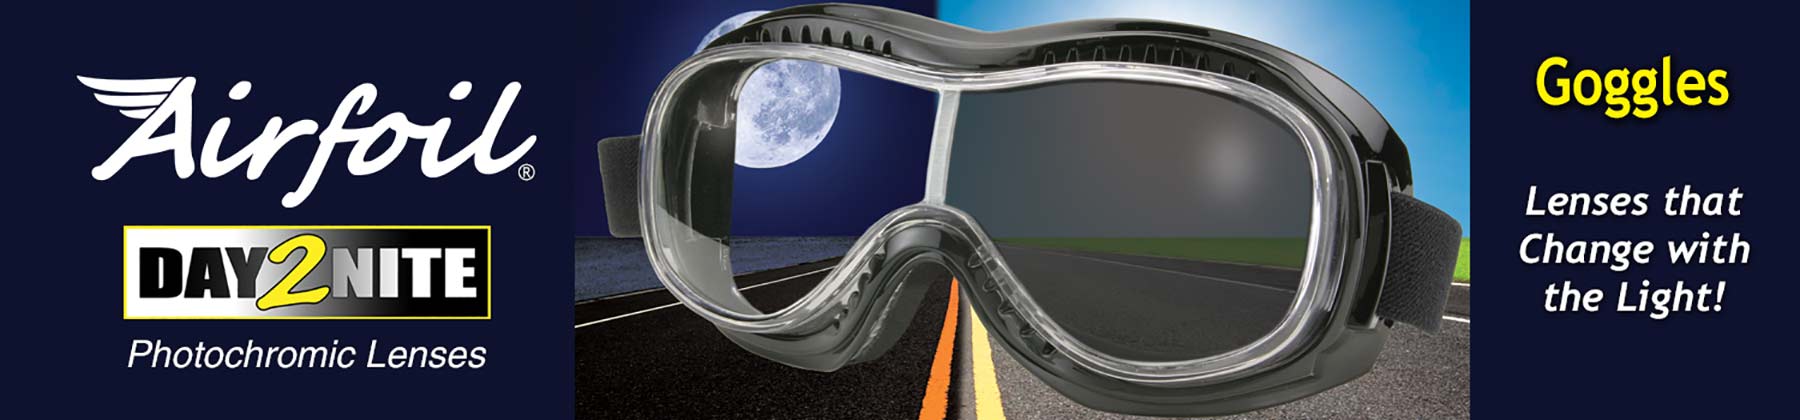 Photochromic Fit Over Goggles, lenses that change